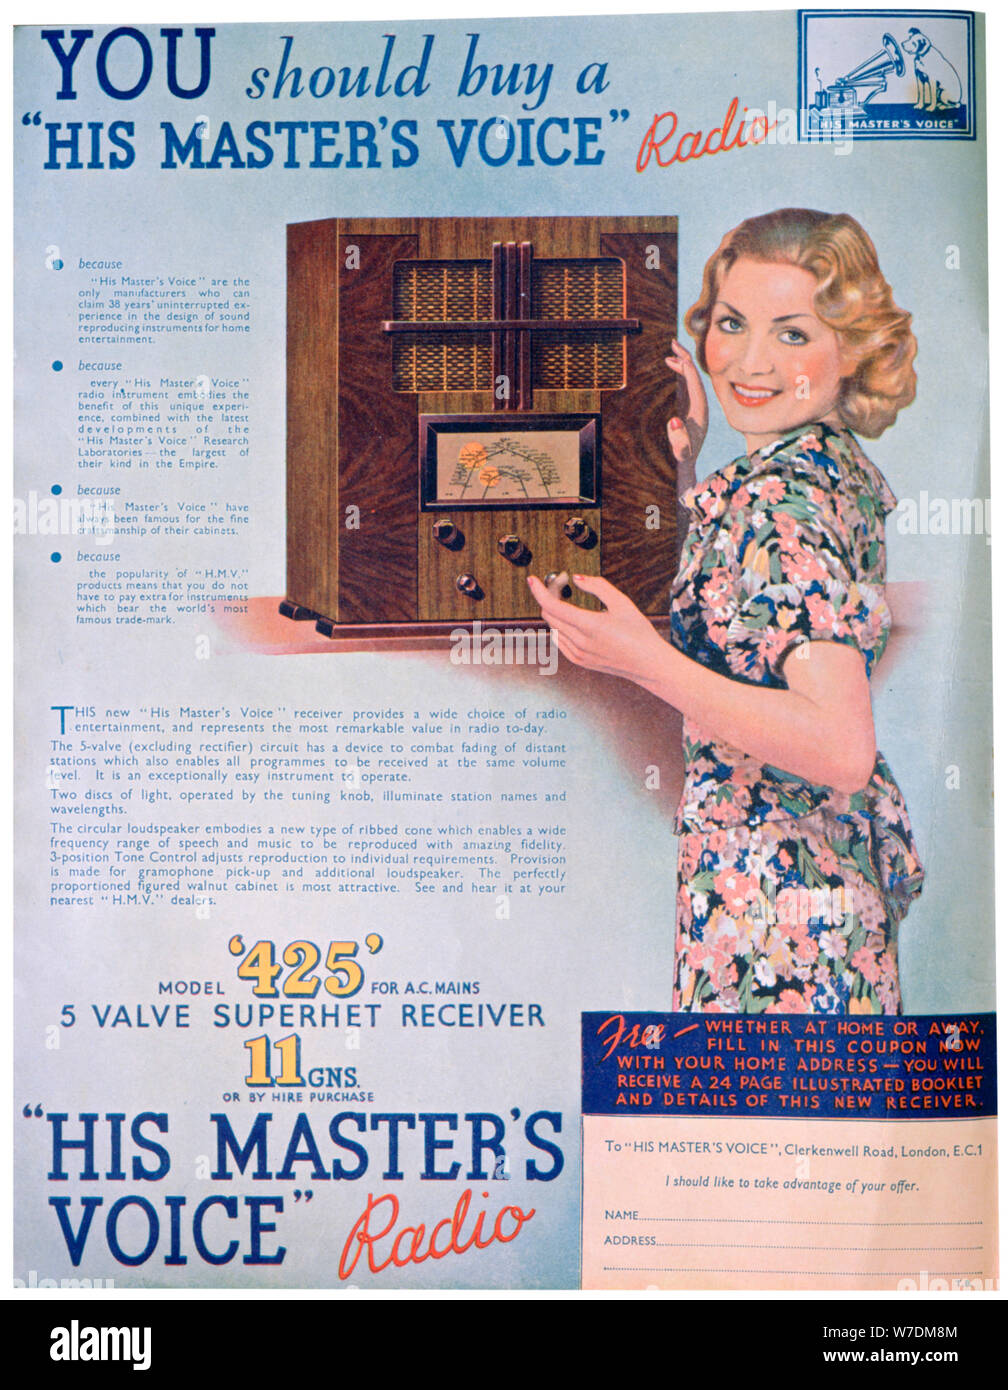 Advert for 'His Master's Voice' radios, 1936. Artist: Unknown Stock Photo